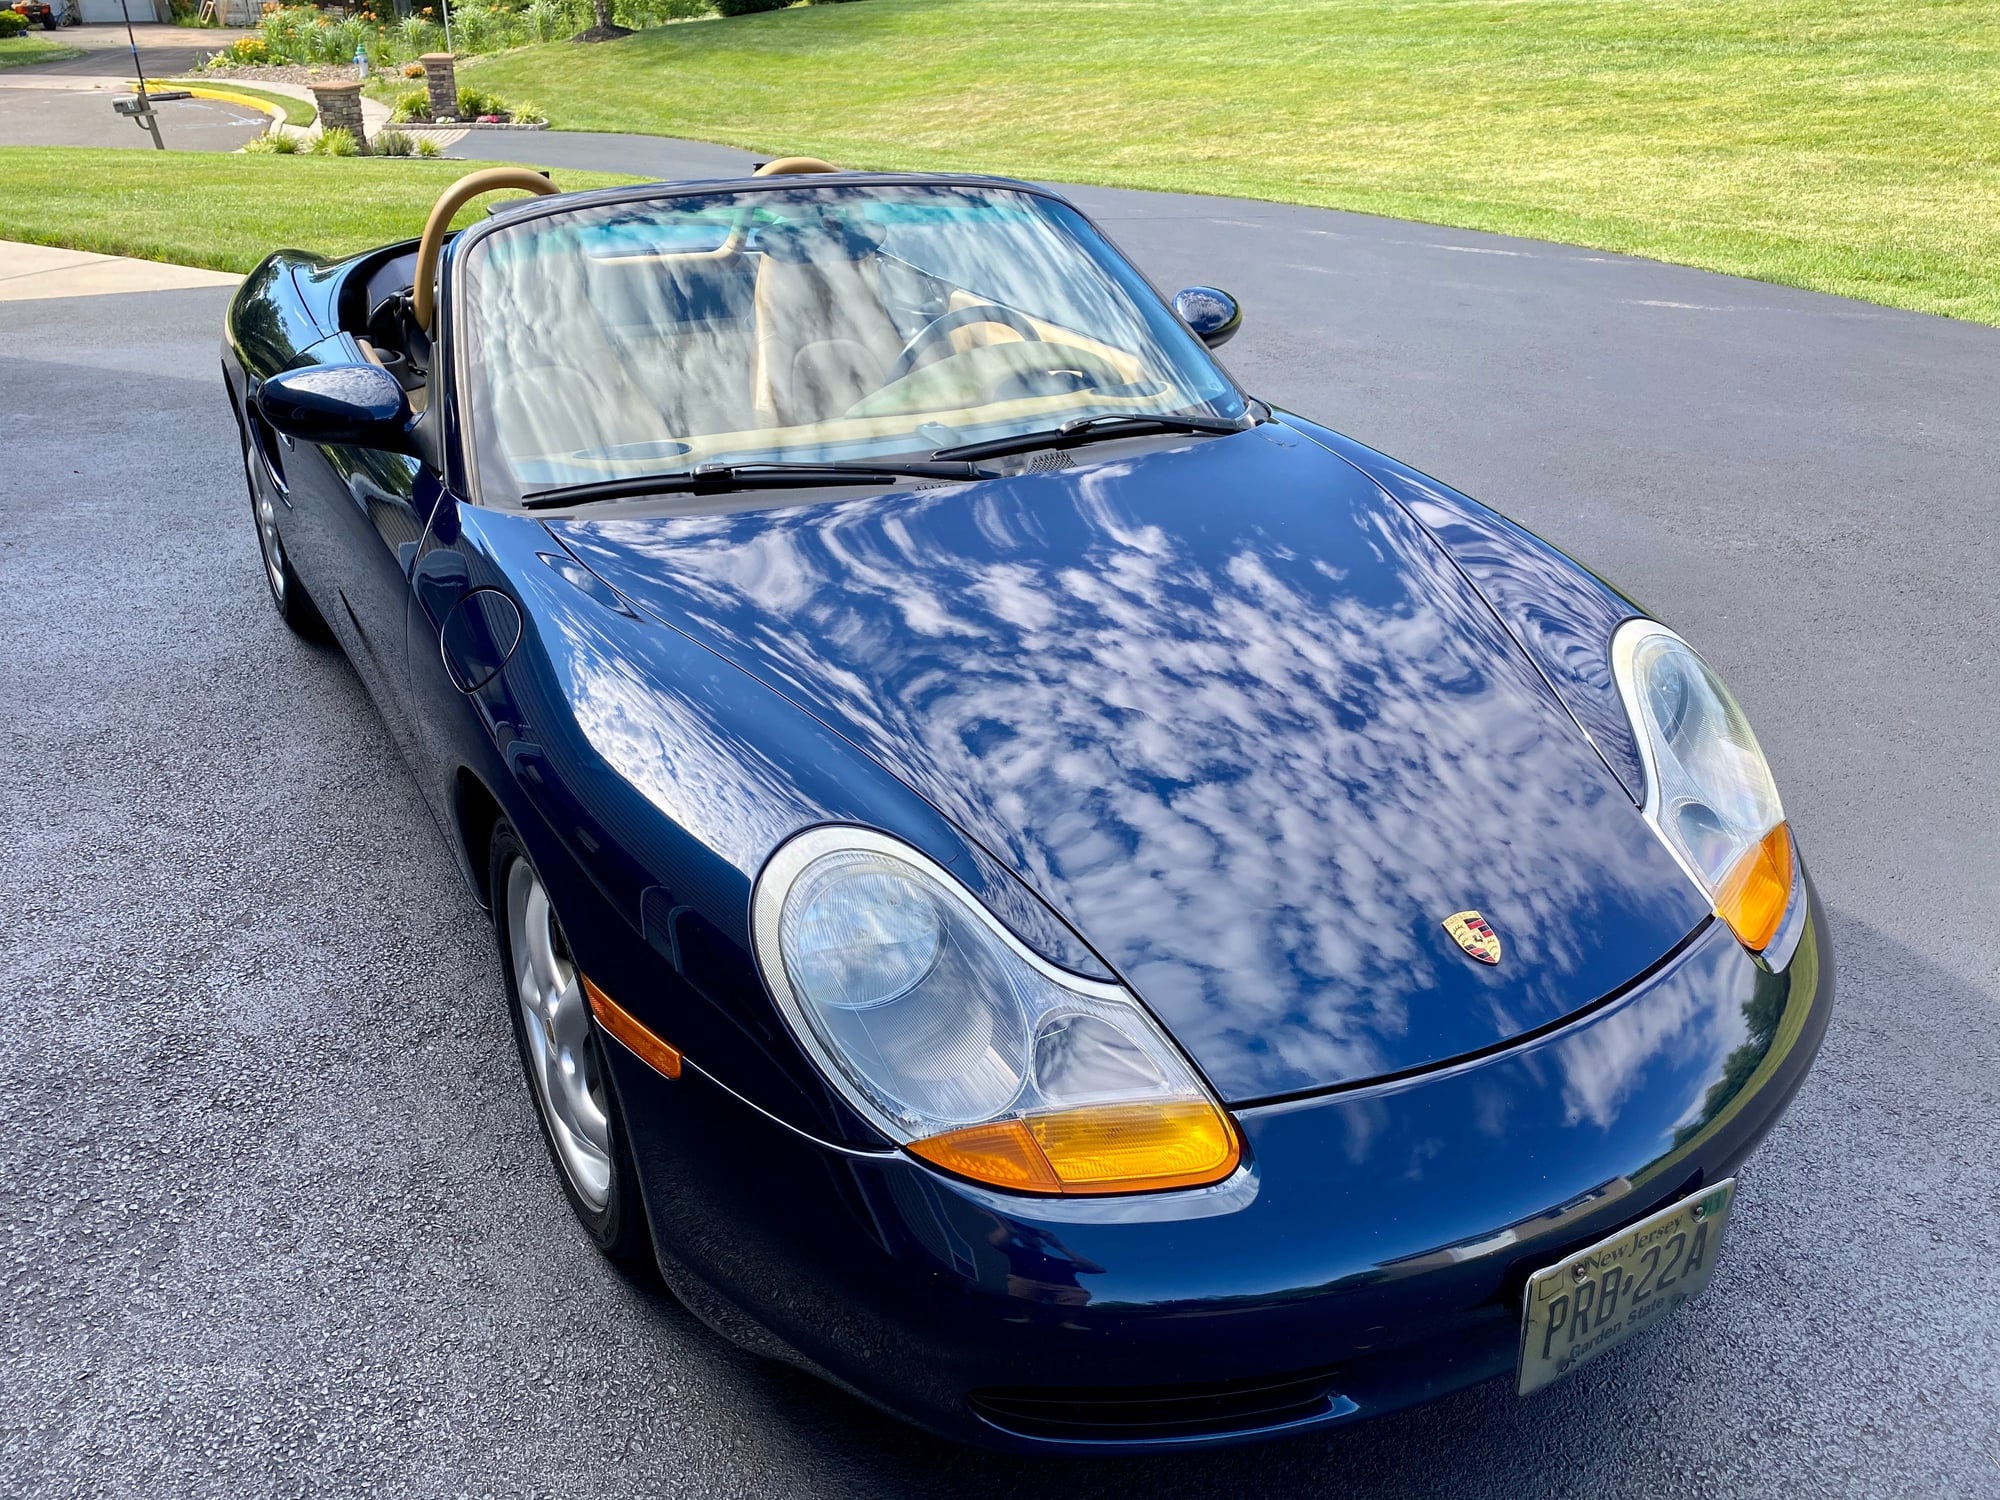 1999 Porsche Boxster - 1999 Boxster 2.5.  Ocean blue metallic/tan, Tiptronic, 76k miles. - Used - VIN WP0CA2981XU628960 - 76,000 Miles - 6 cyl - 2WD - Automatic - Convertible - Blue - Lansdale, PA 19446, United States